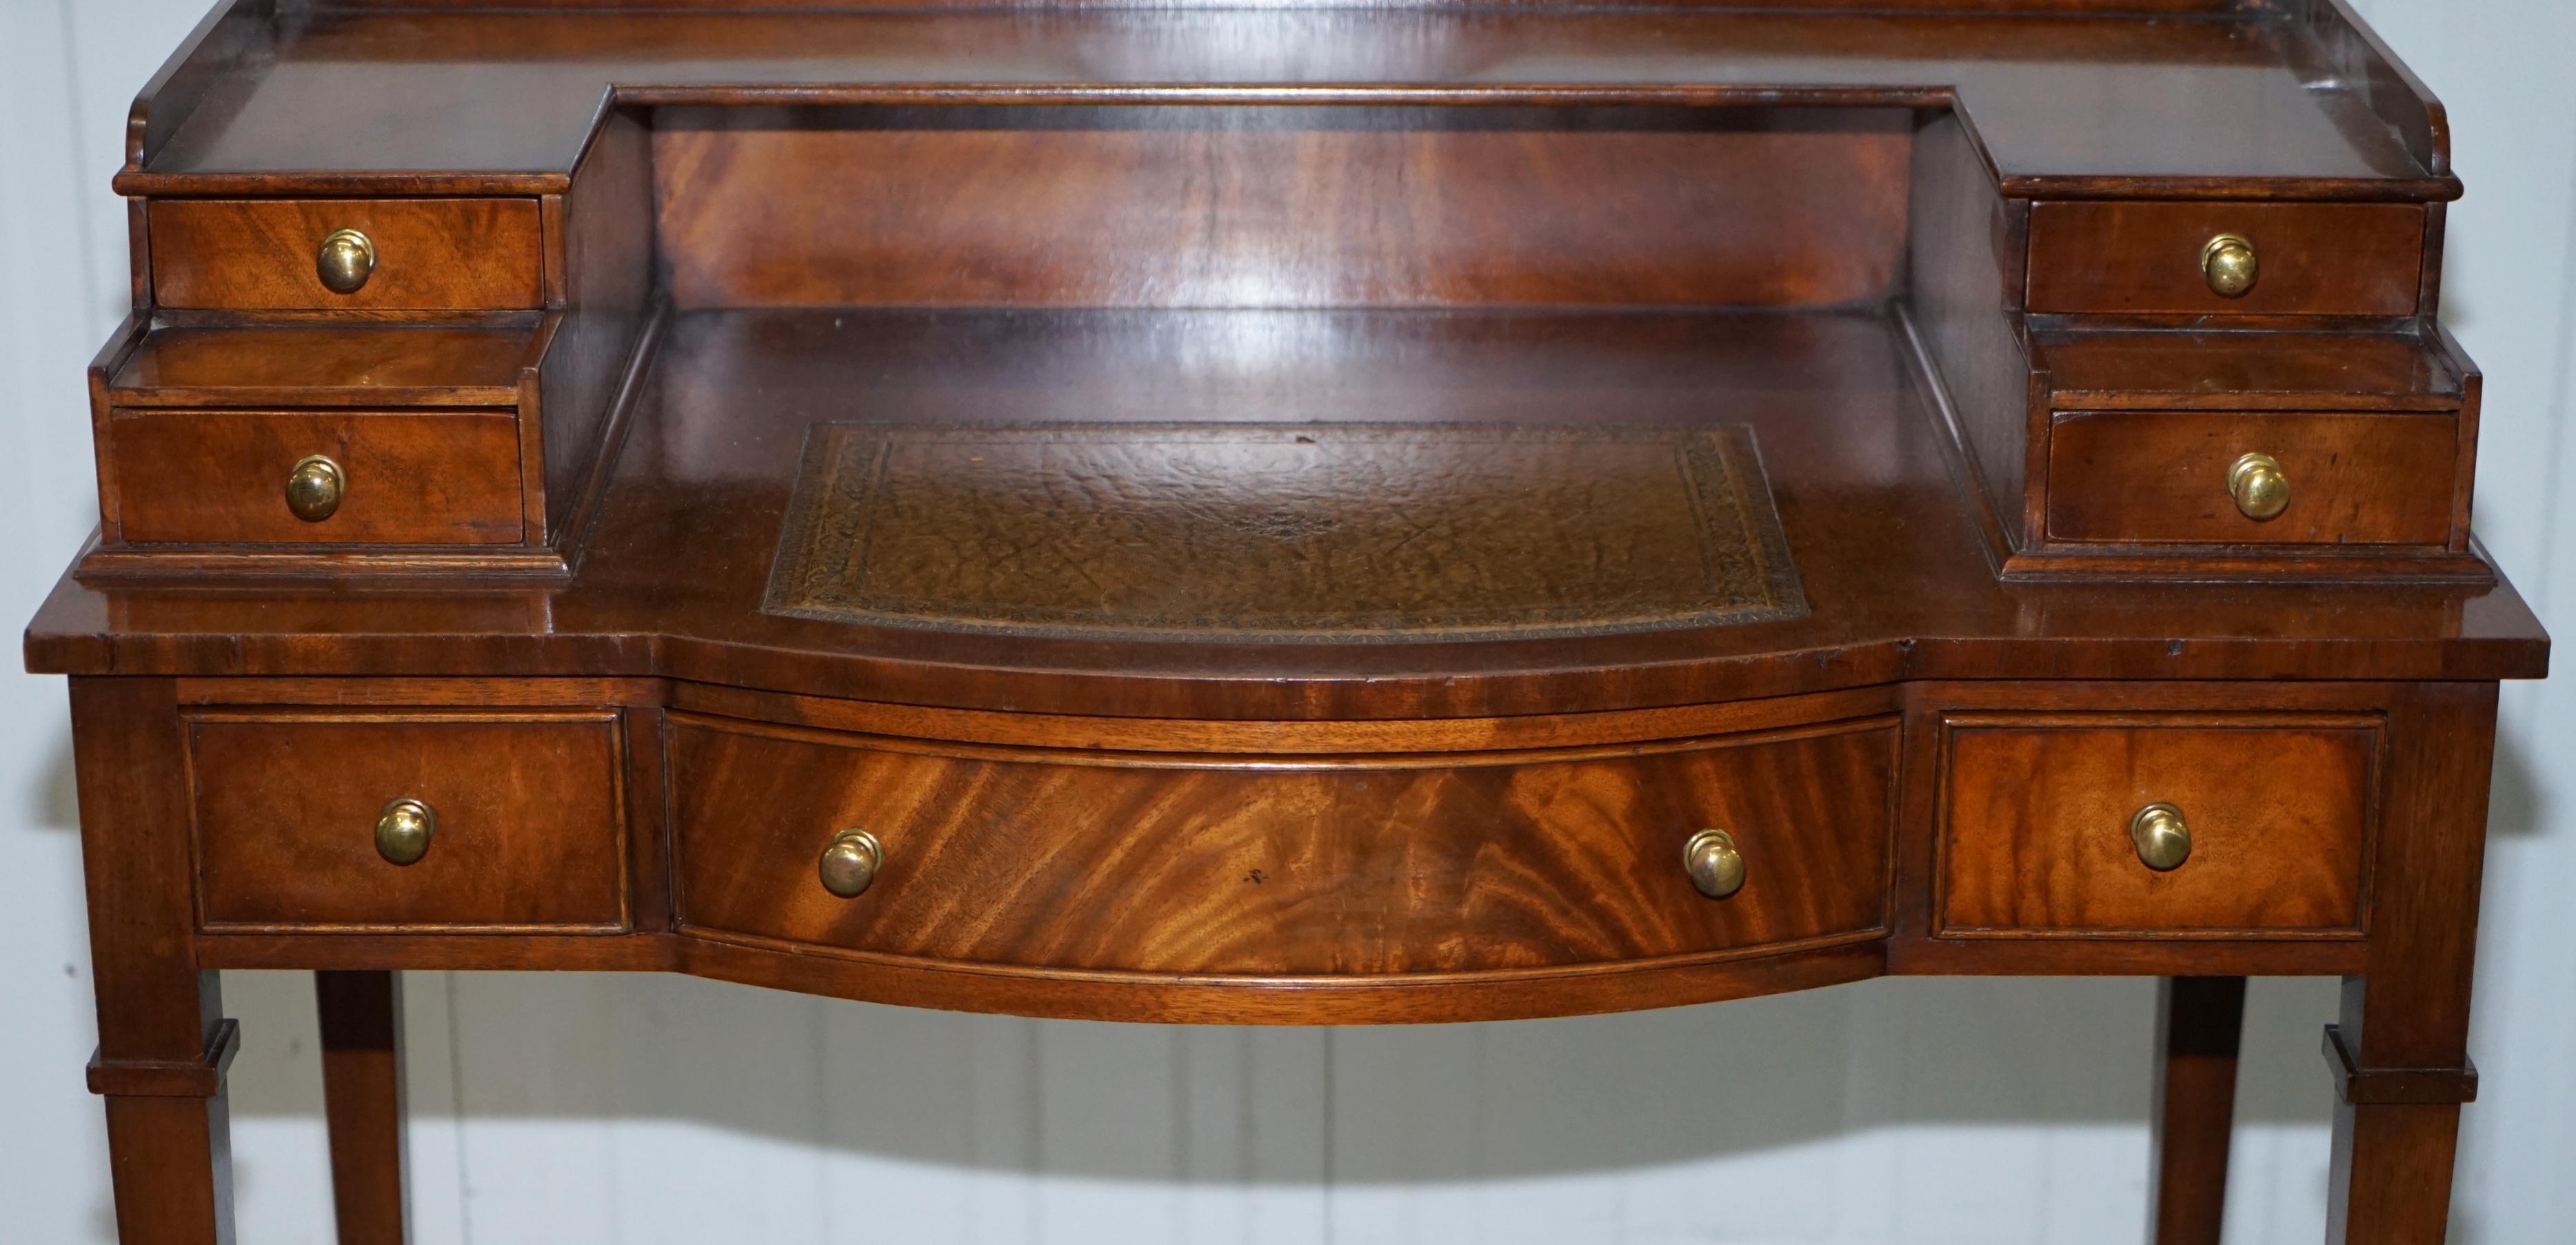 Hand-Carved Light Mahogany Bevan Funnell Desk, Leather Writing Surface and Drawers